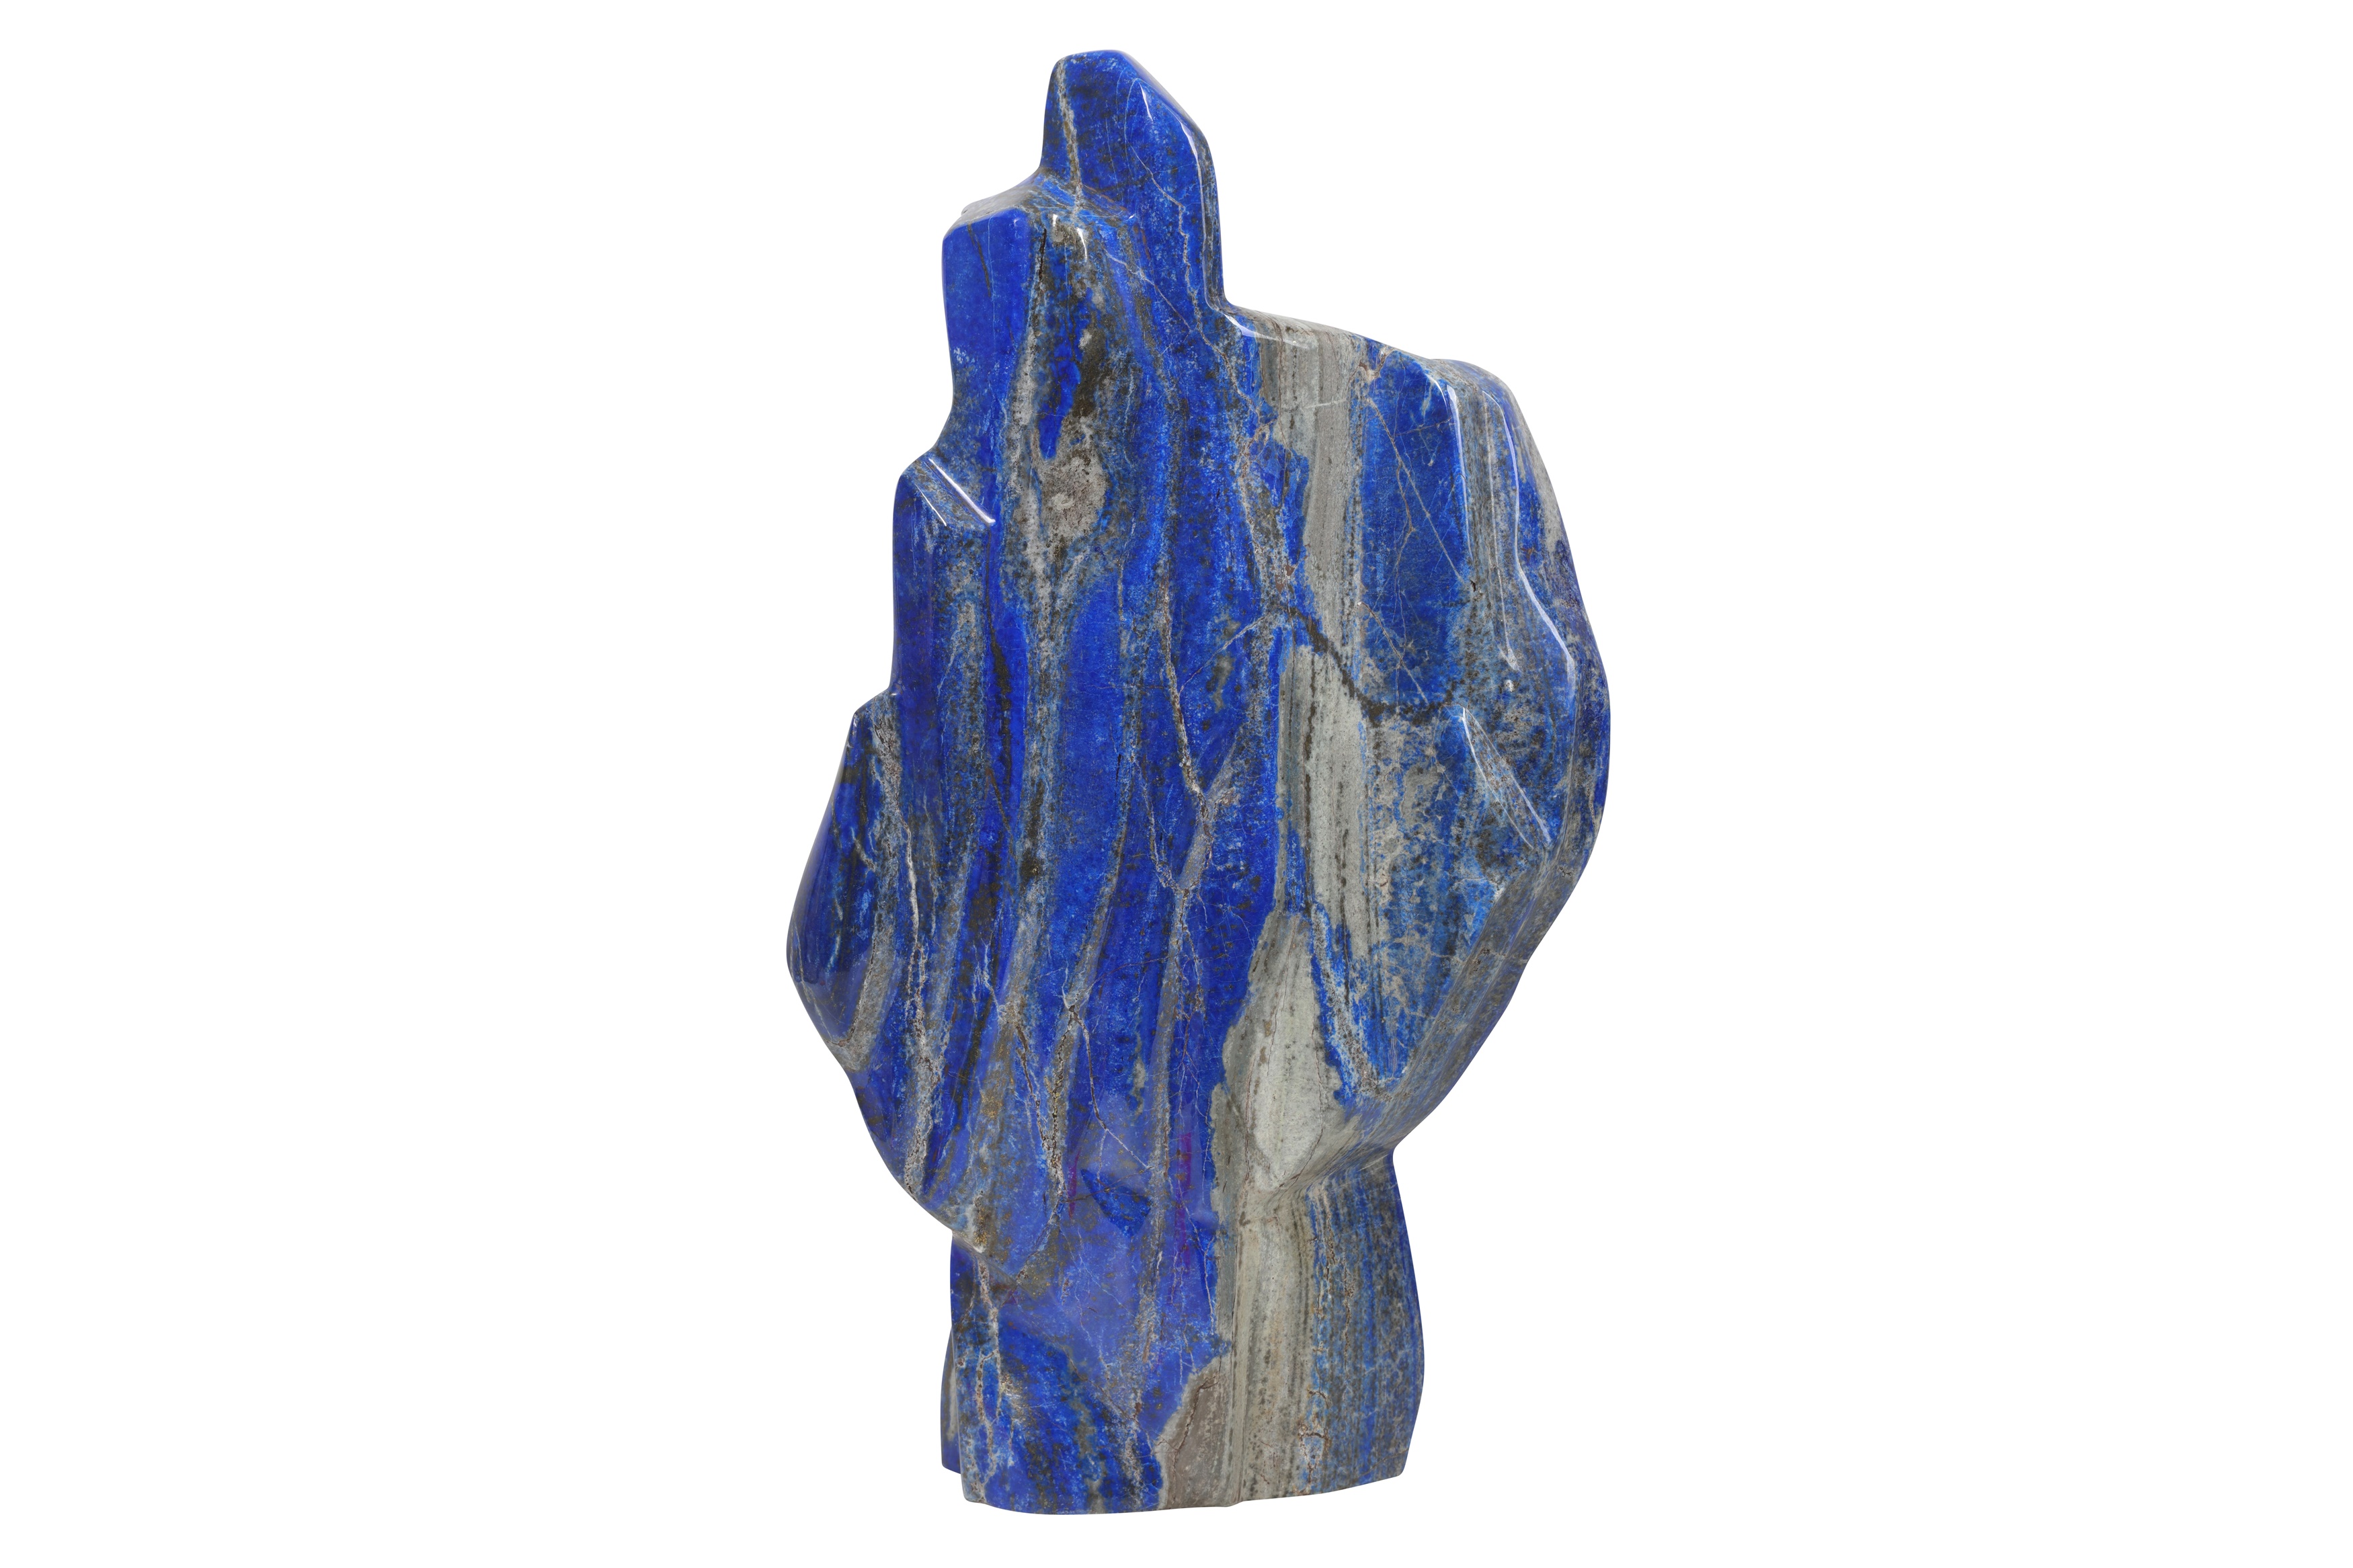 AN EXTREMELY LARGE SOLID LAPIS LAZULI FREE FORM SPECIMEN